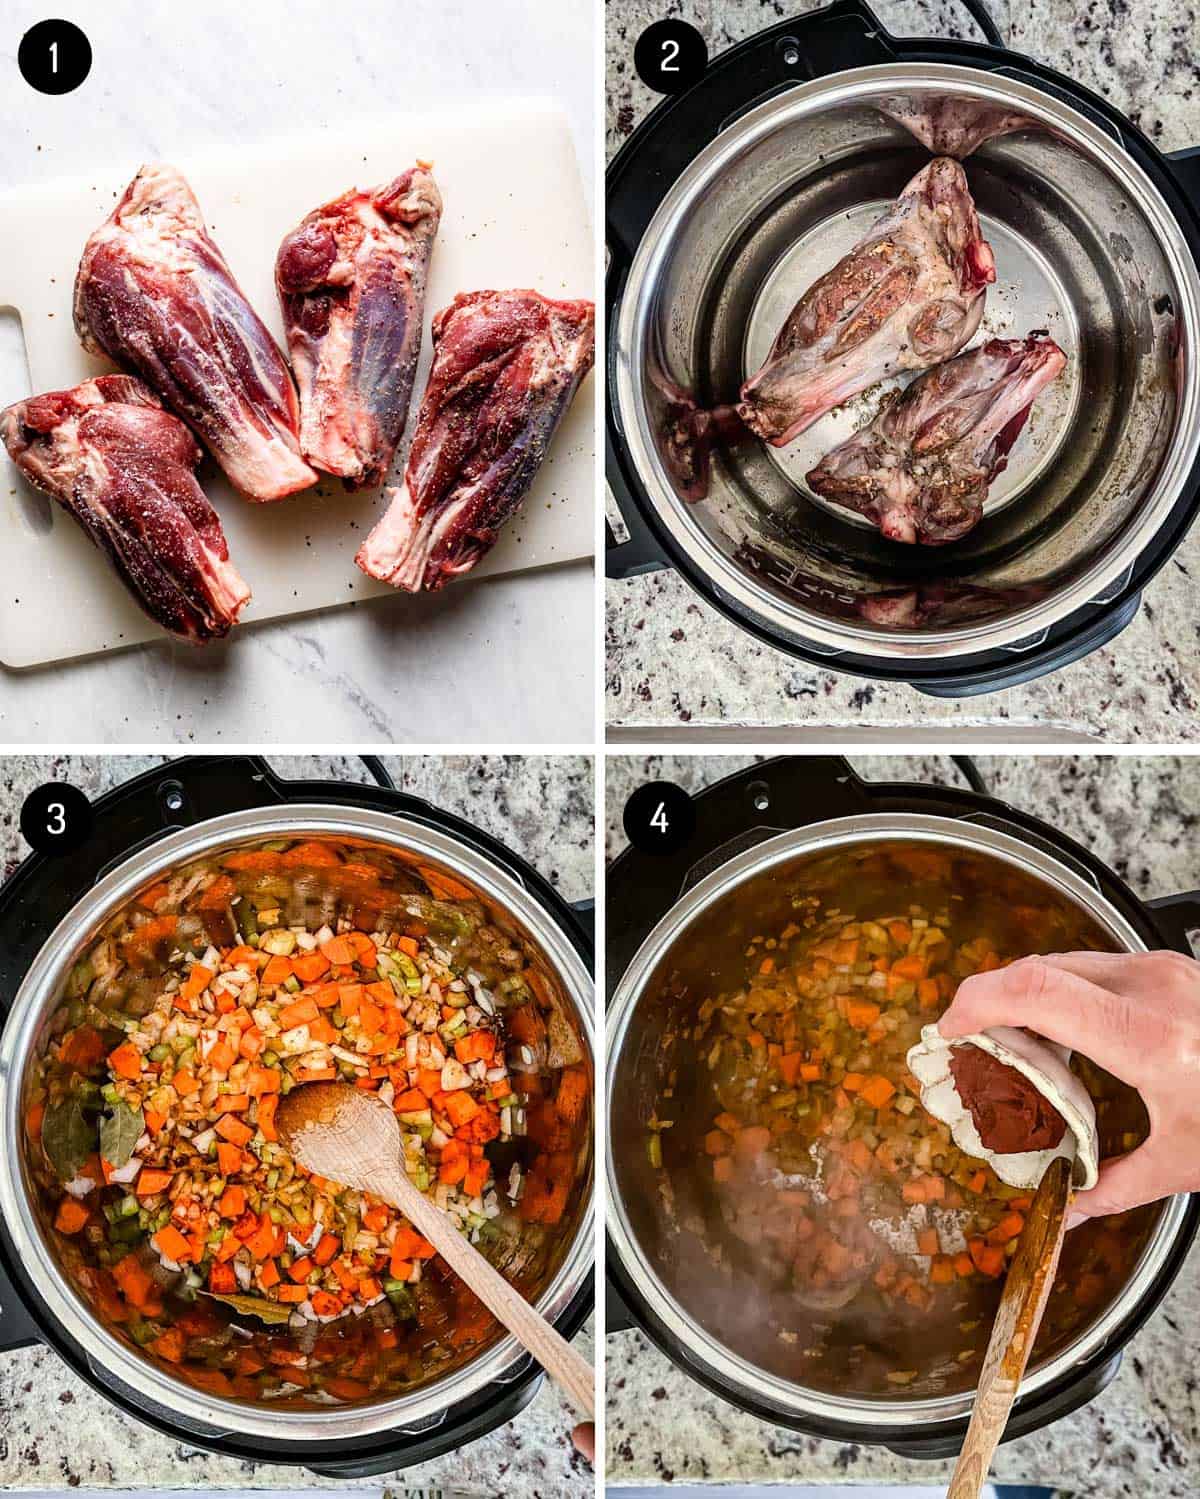 A person showing how to cook lamb in a pressure cooker from the top view.